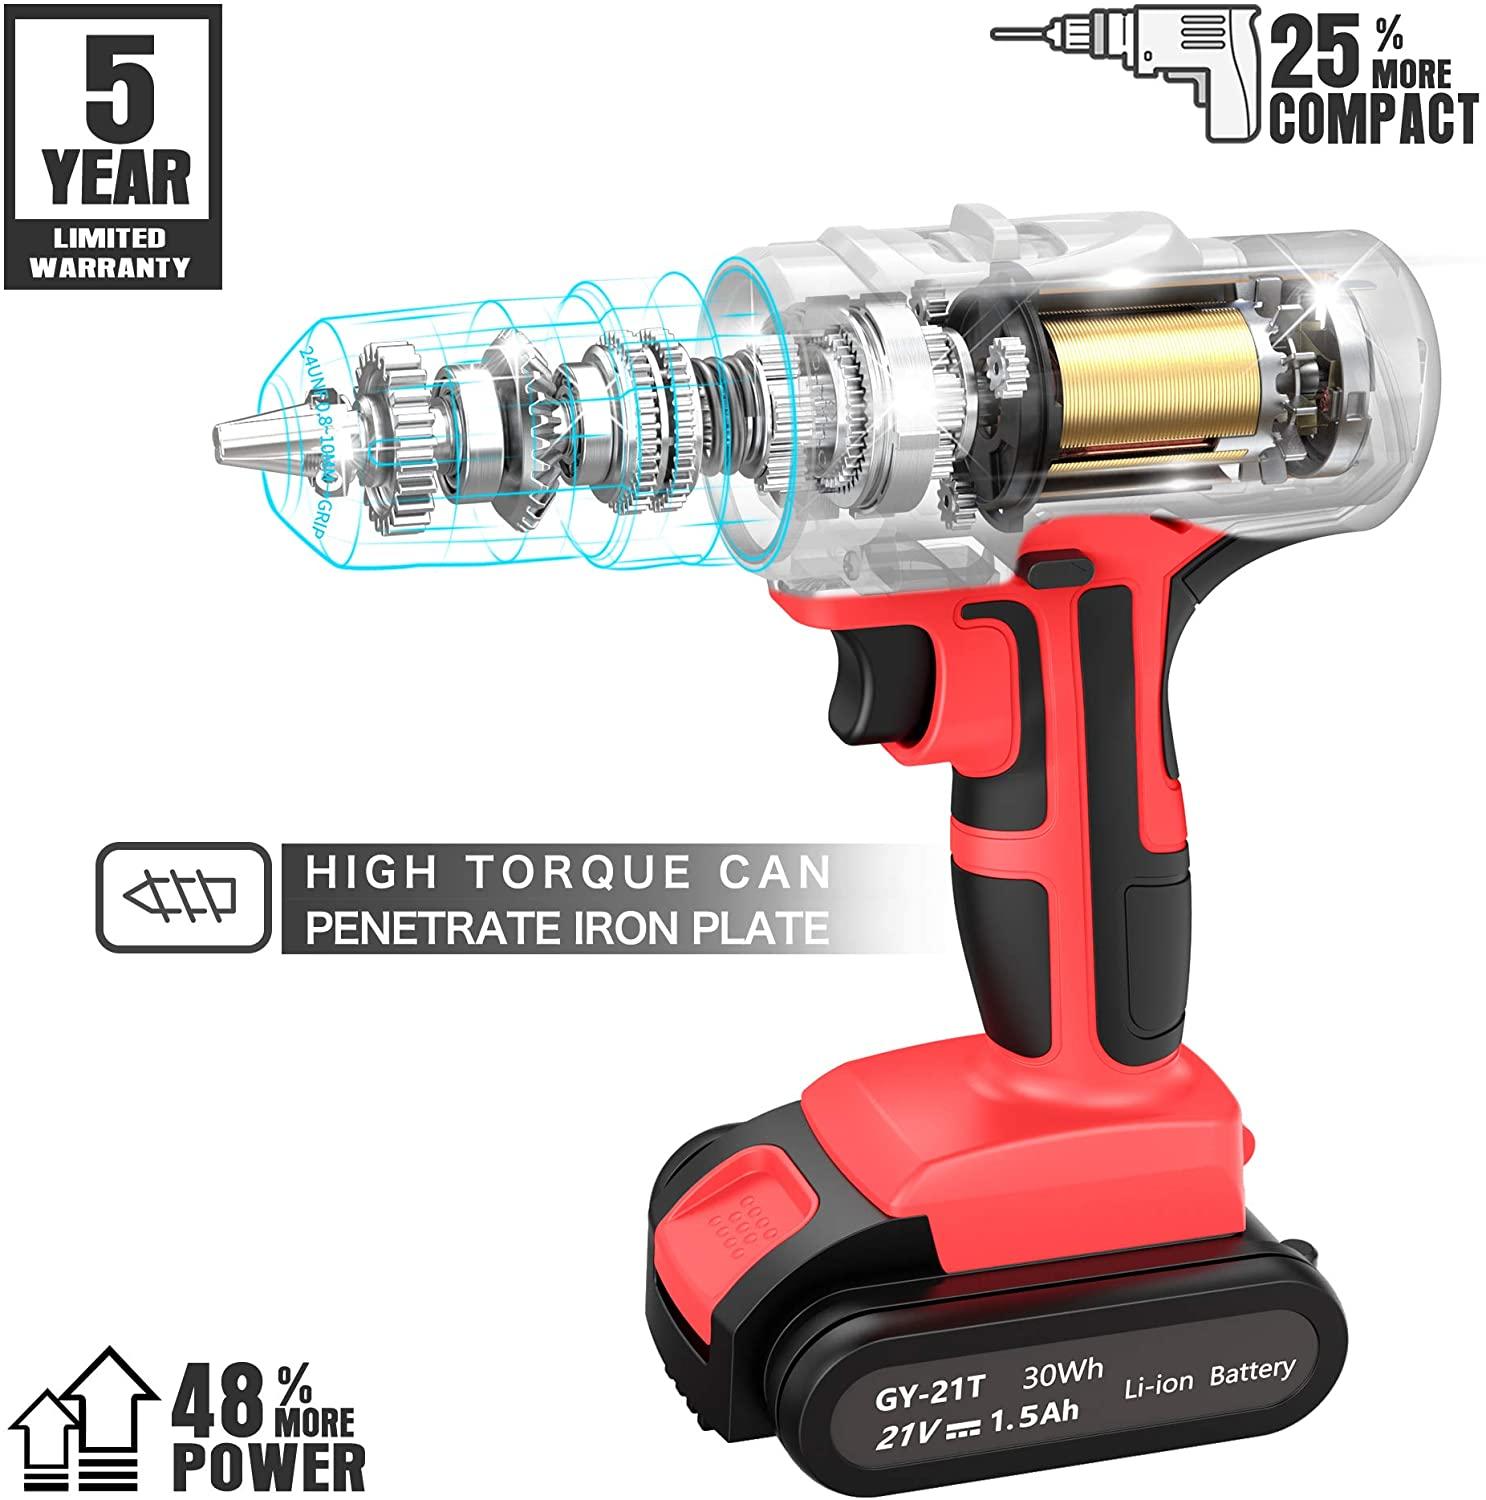 21V Cordless Impact Wrench 20-30Nm High Torque Brushless Drill with Battery Kit 